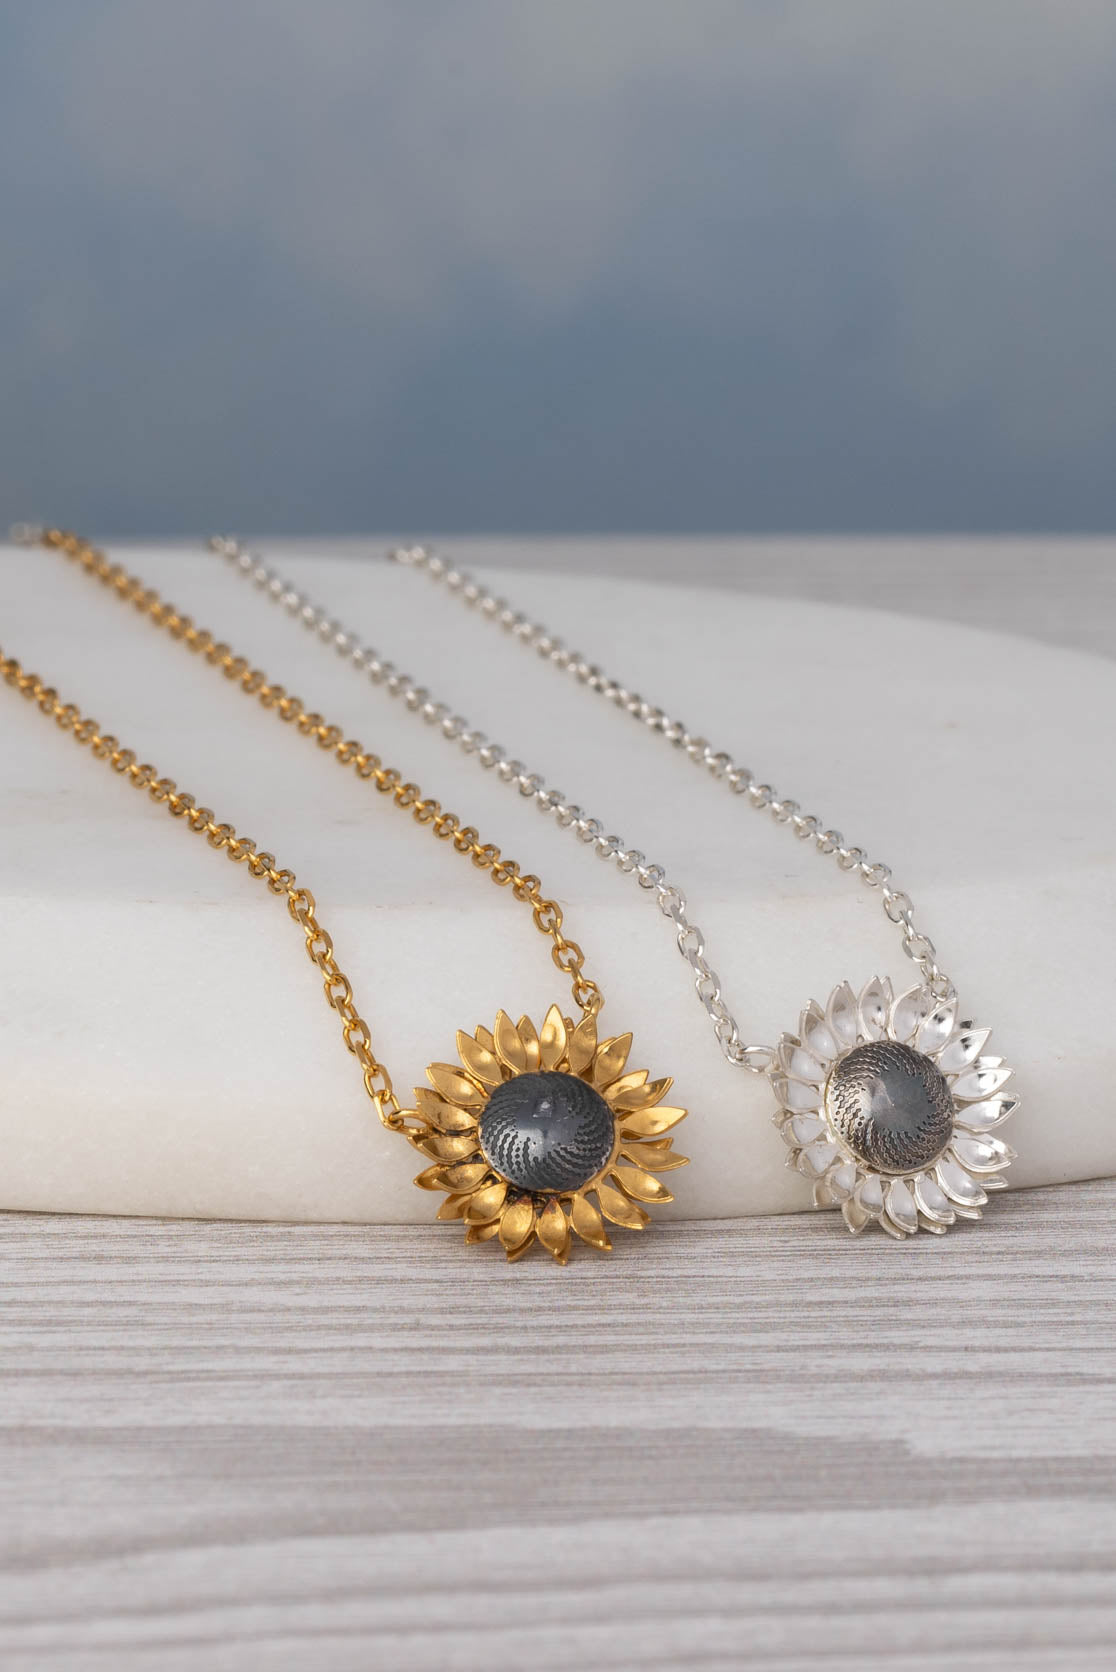 Sunflower Necklace in Silver